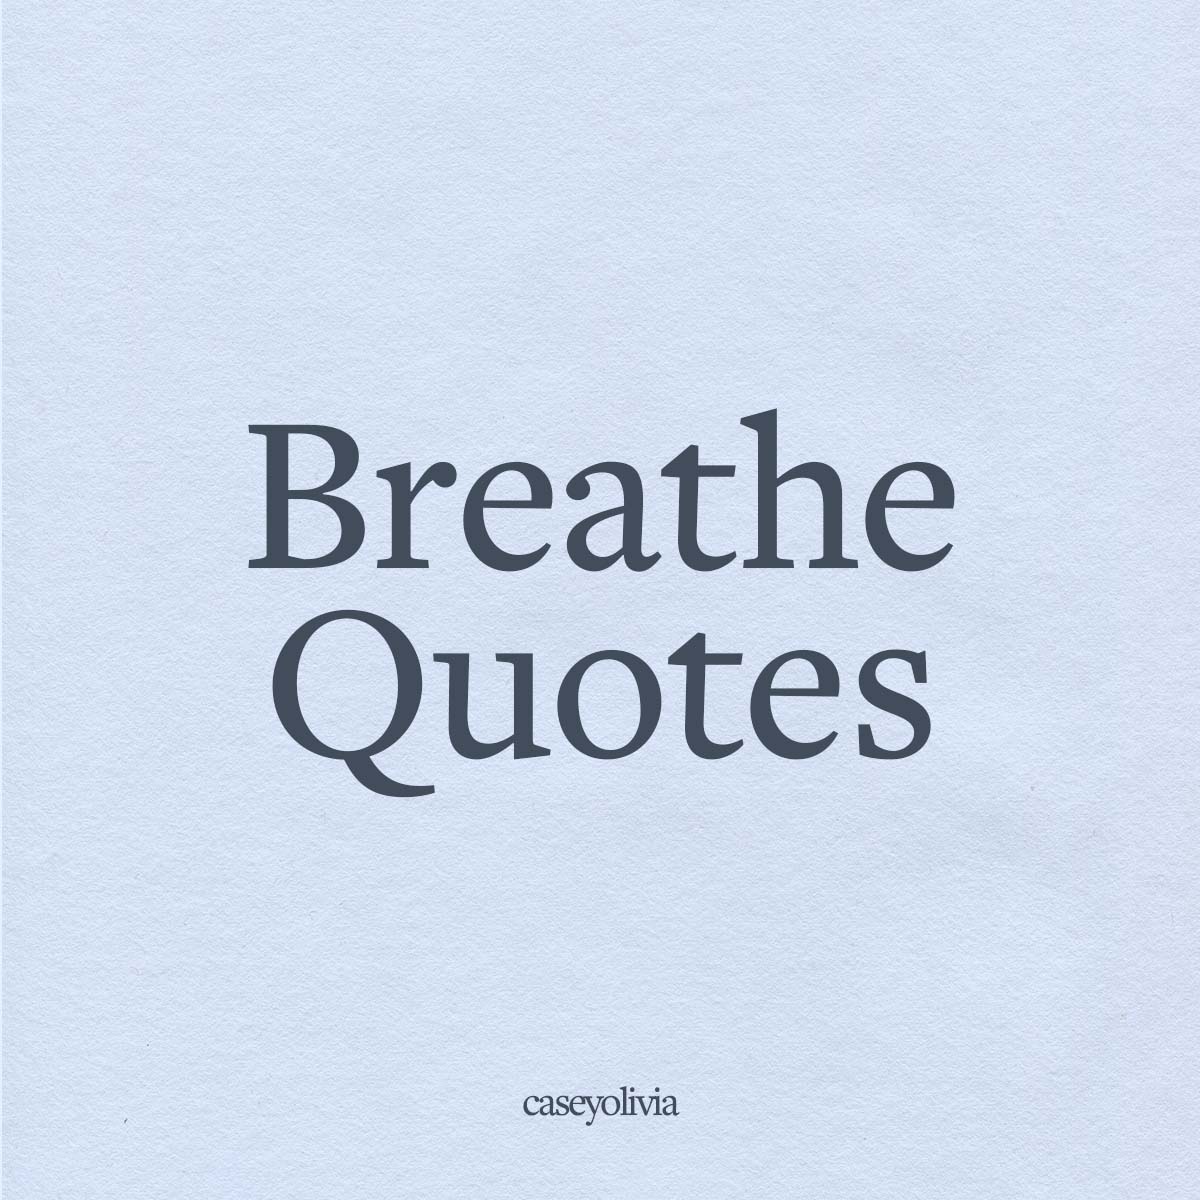 list of the best breathe quotes and images